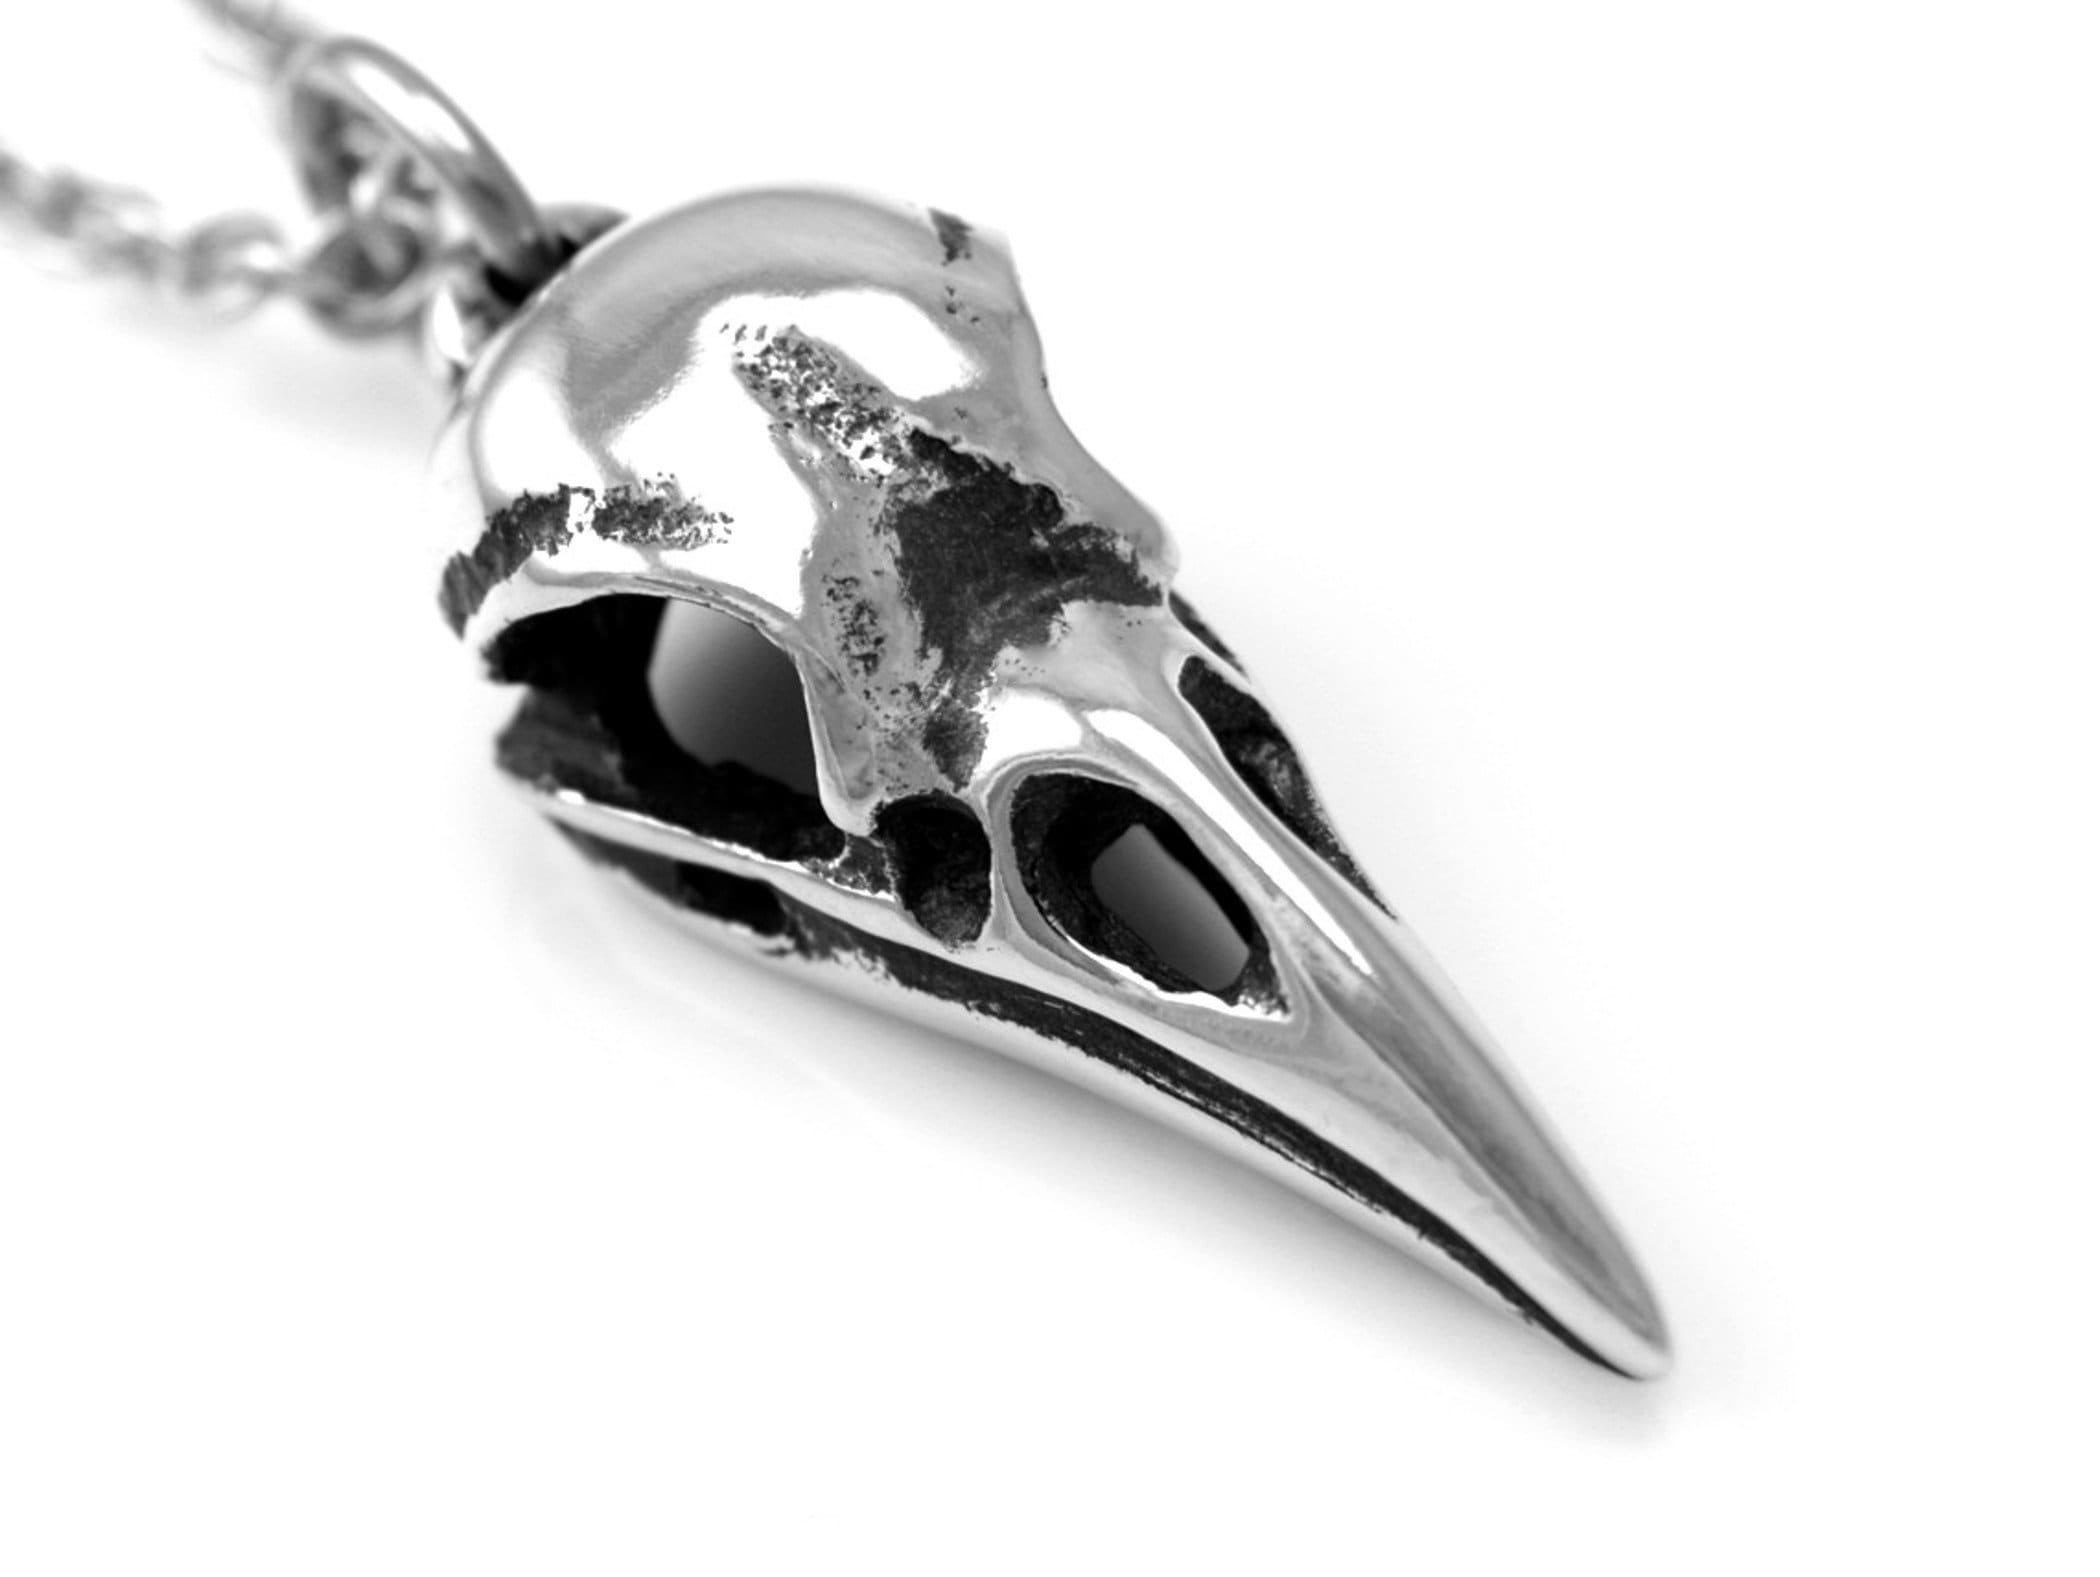 50Pcs Alloy Raven Skull Charms Bird Head Skeleton Charms Crow Beak Bird  Skull Charm Eagle Skull Pendant Charm For Halloween Witch Pagan Necklace